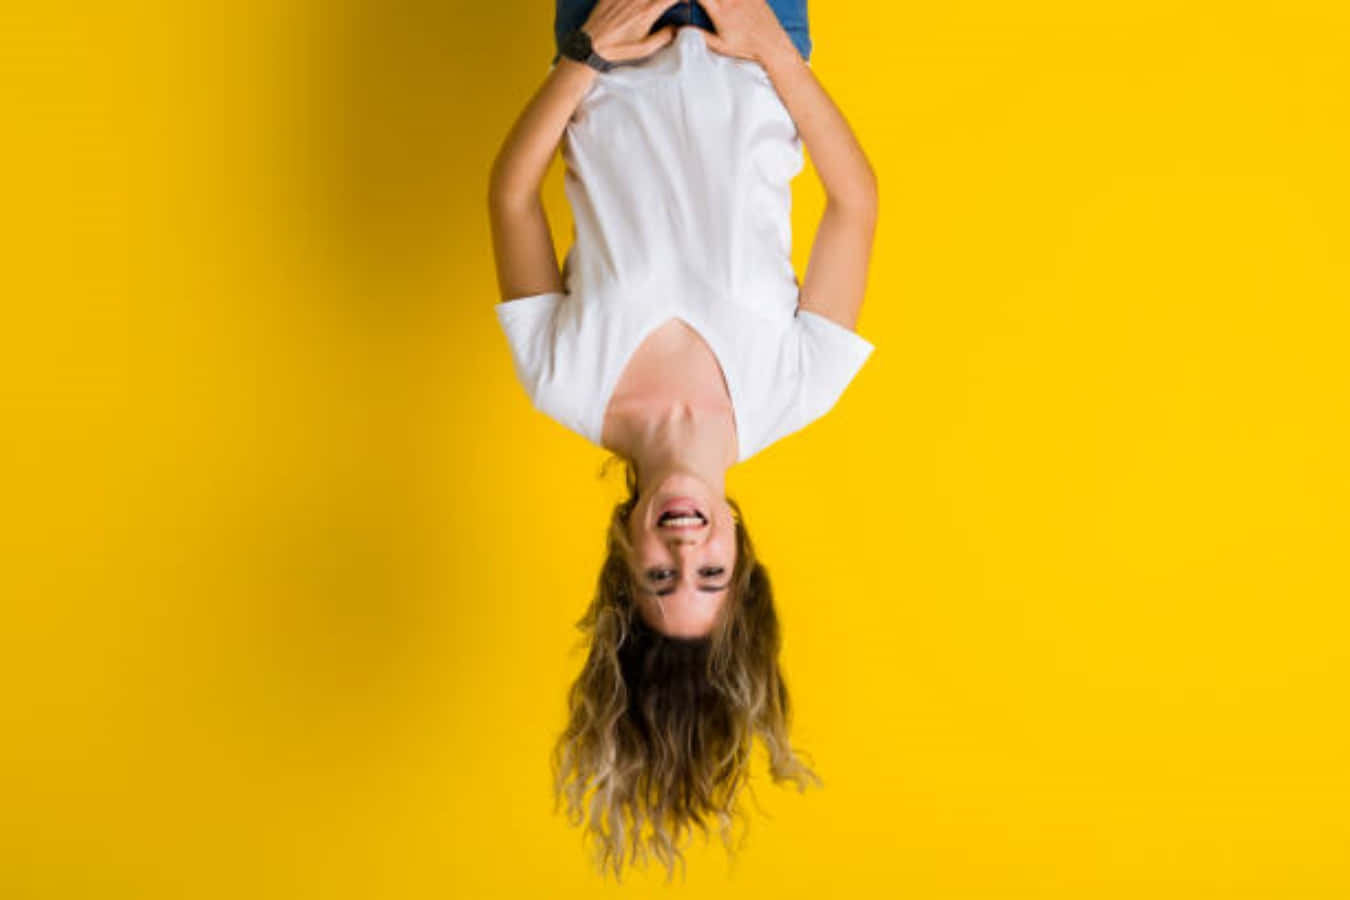 A Woman Is Upside Down On A Yellow Background